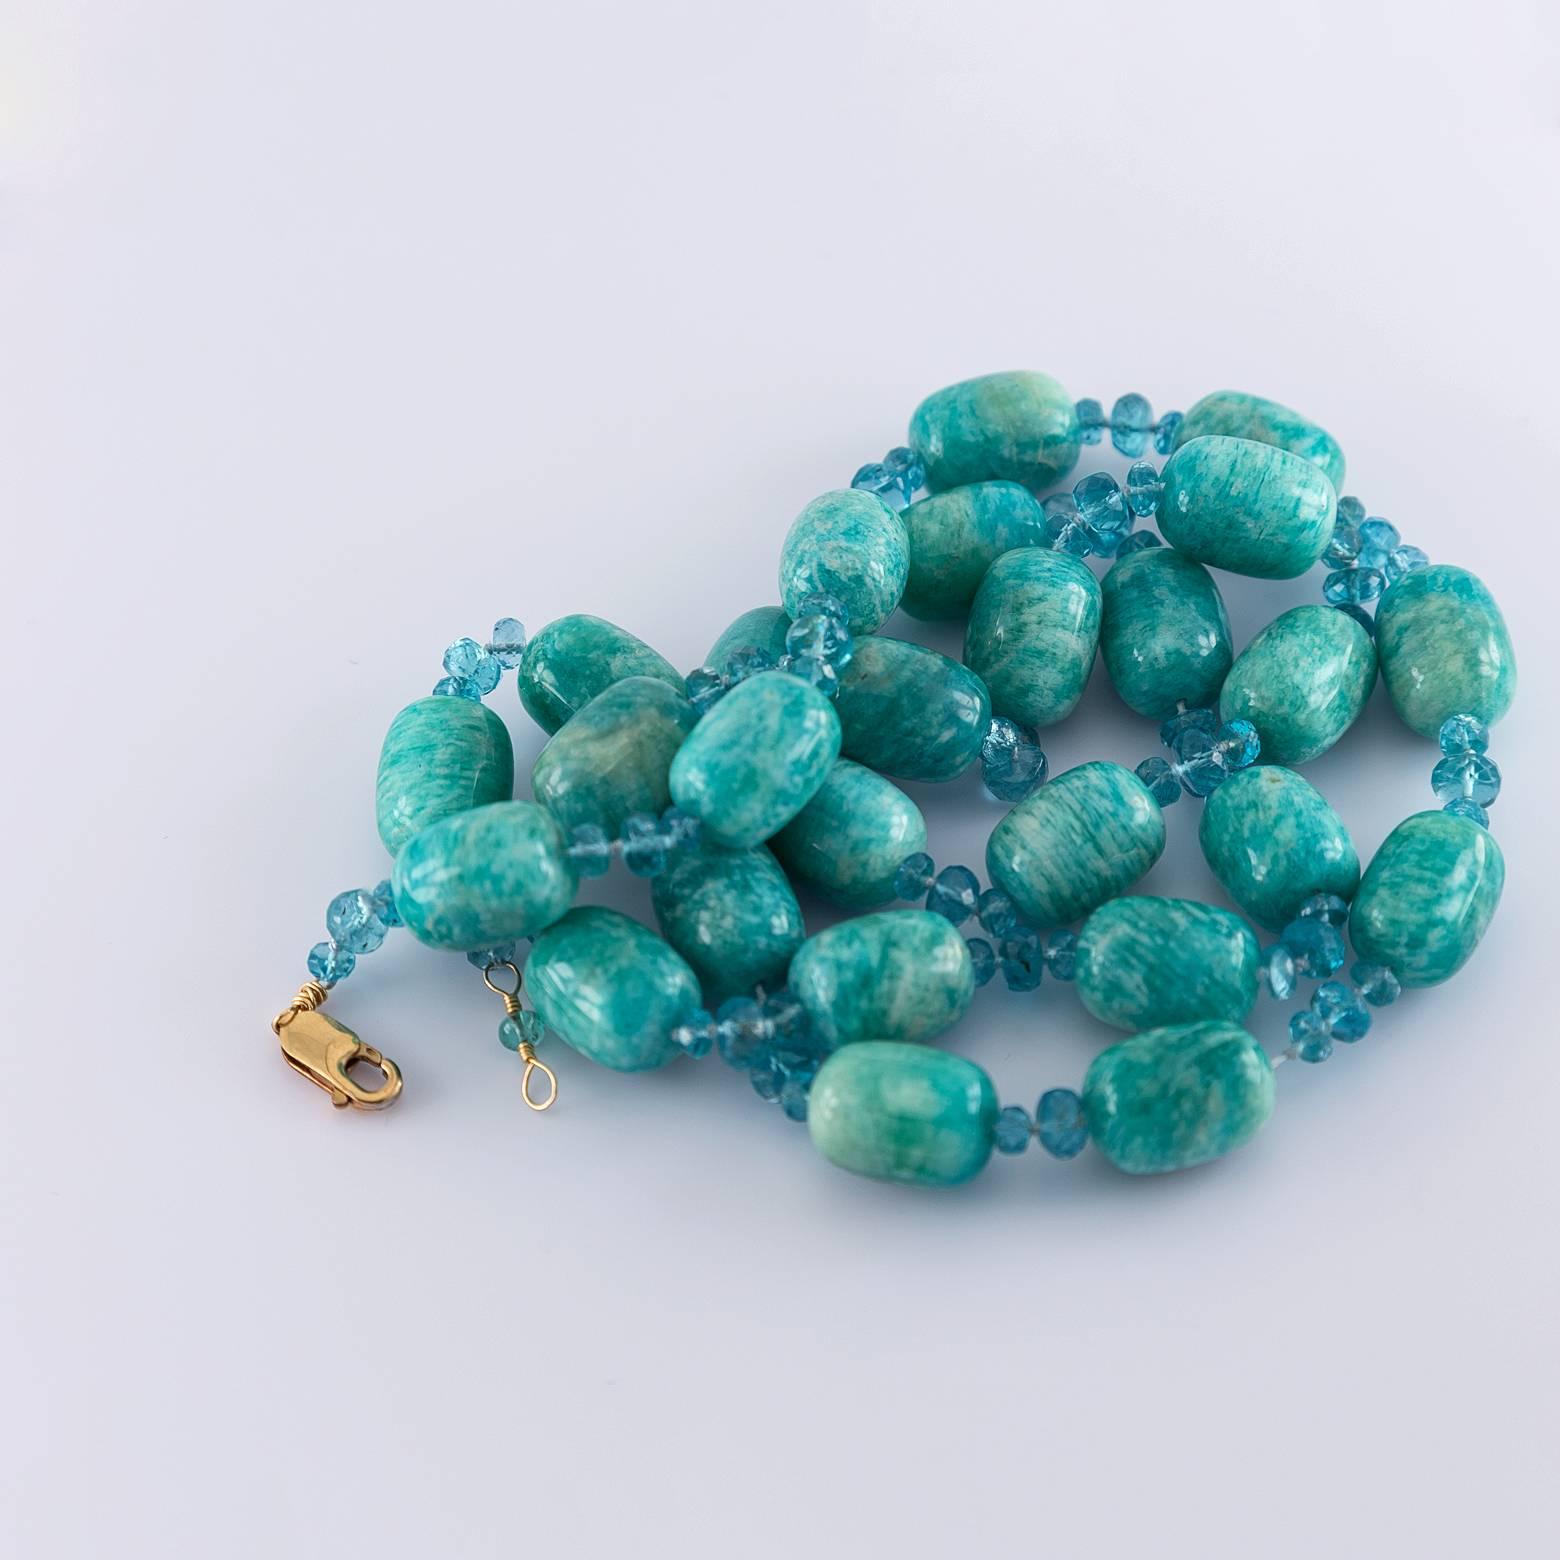 Modern Amazonite and Apatite Bead Necklace  1